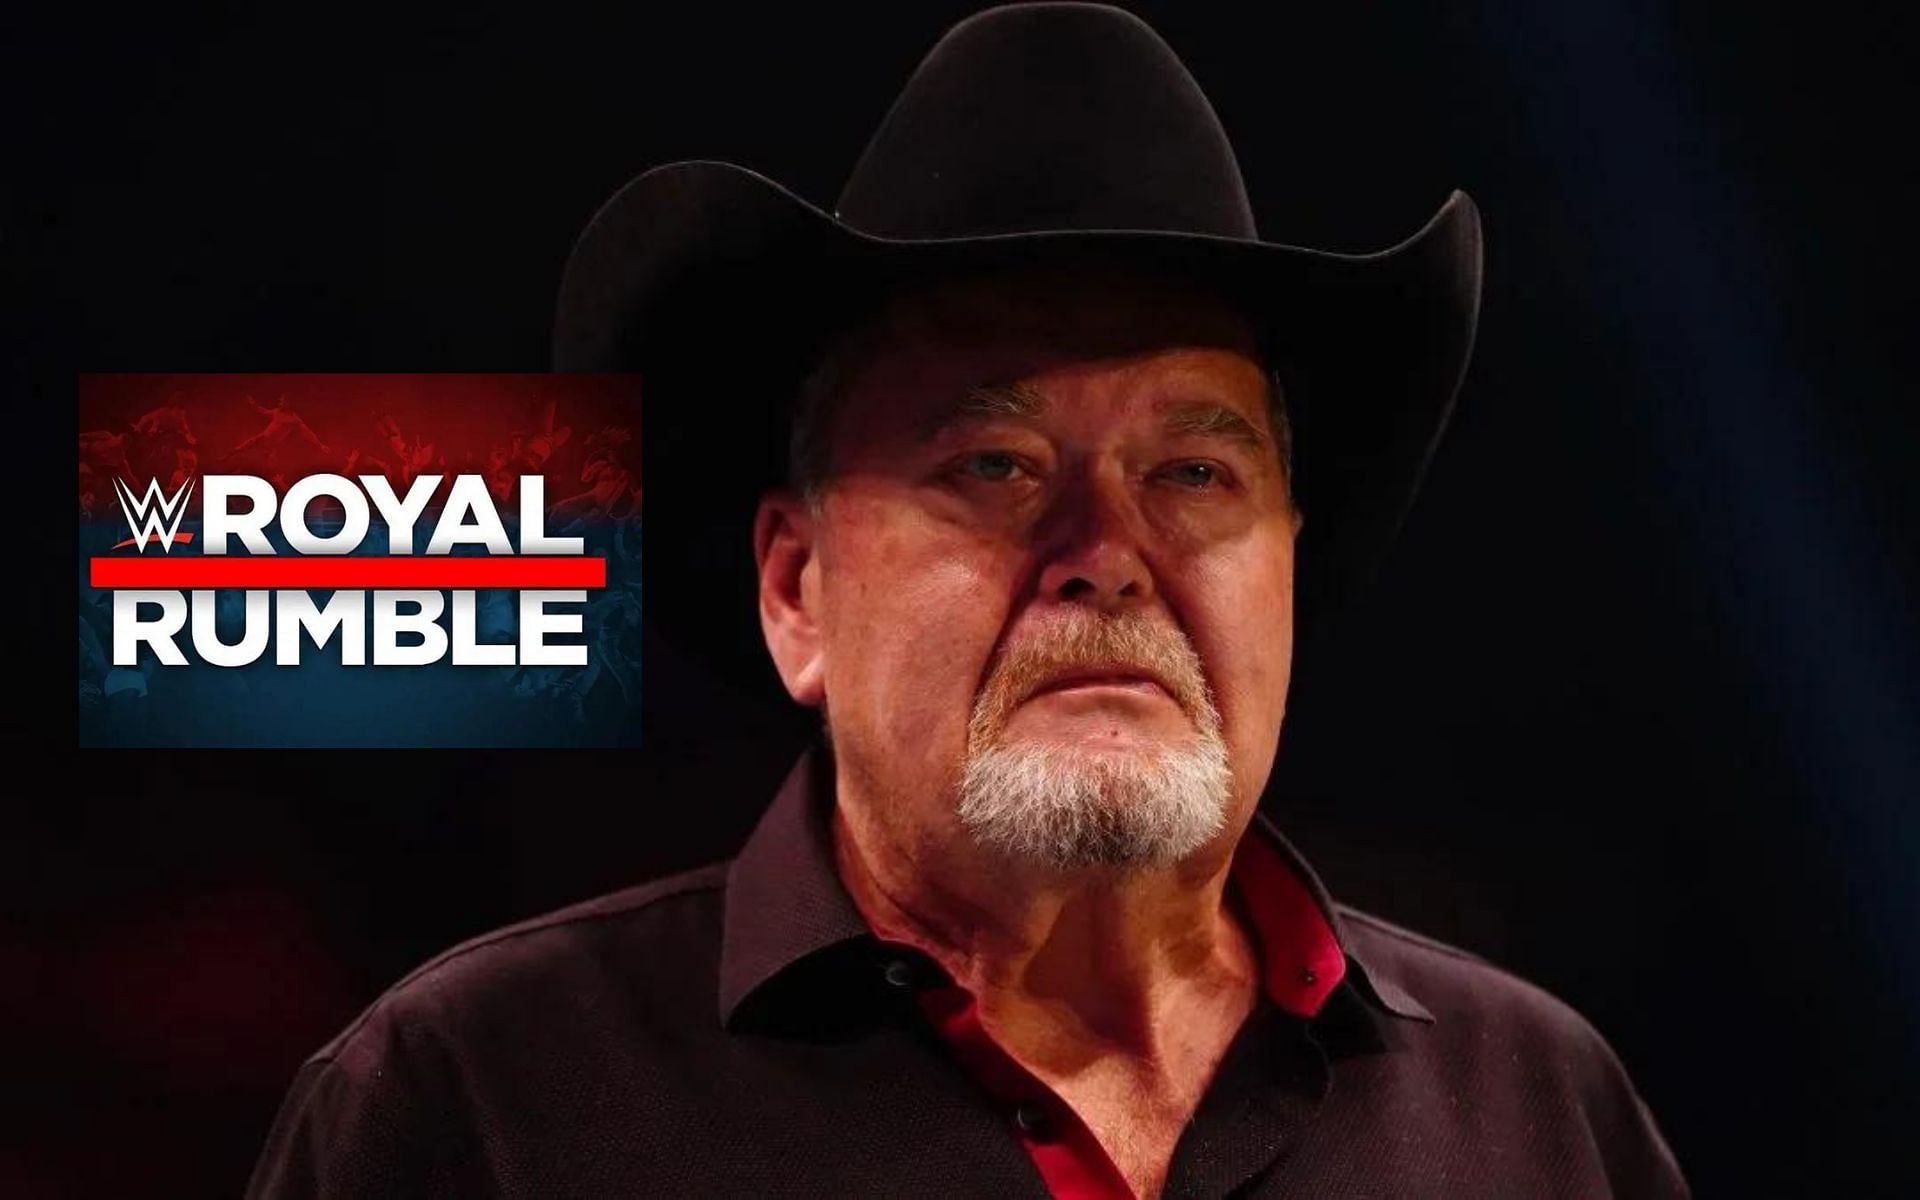 Jim Ross is currently the commentator for AEW